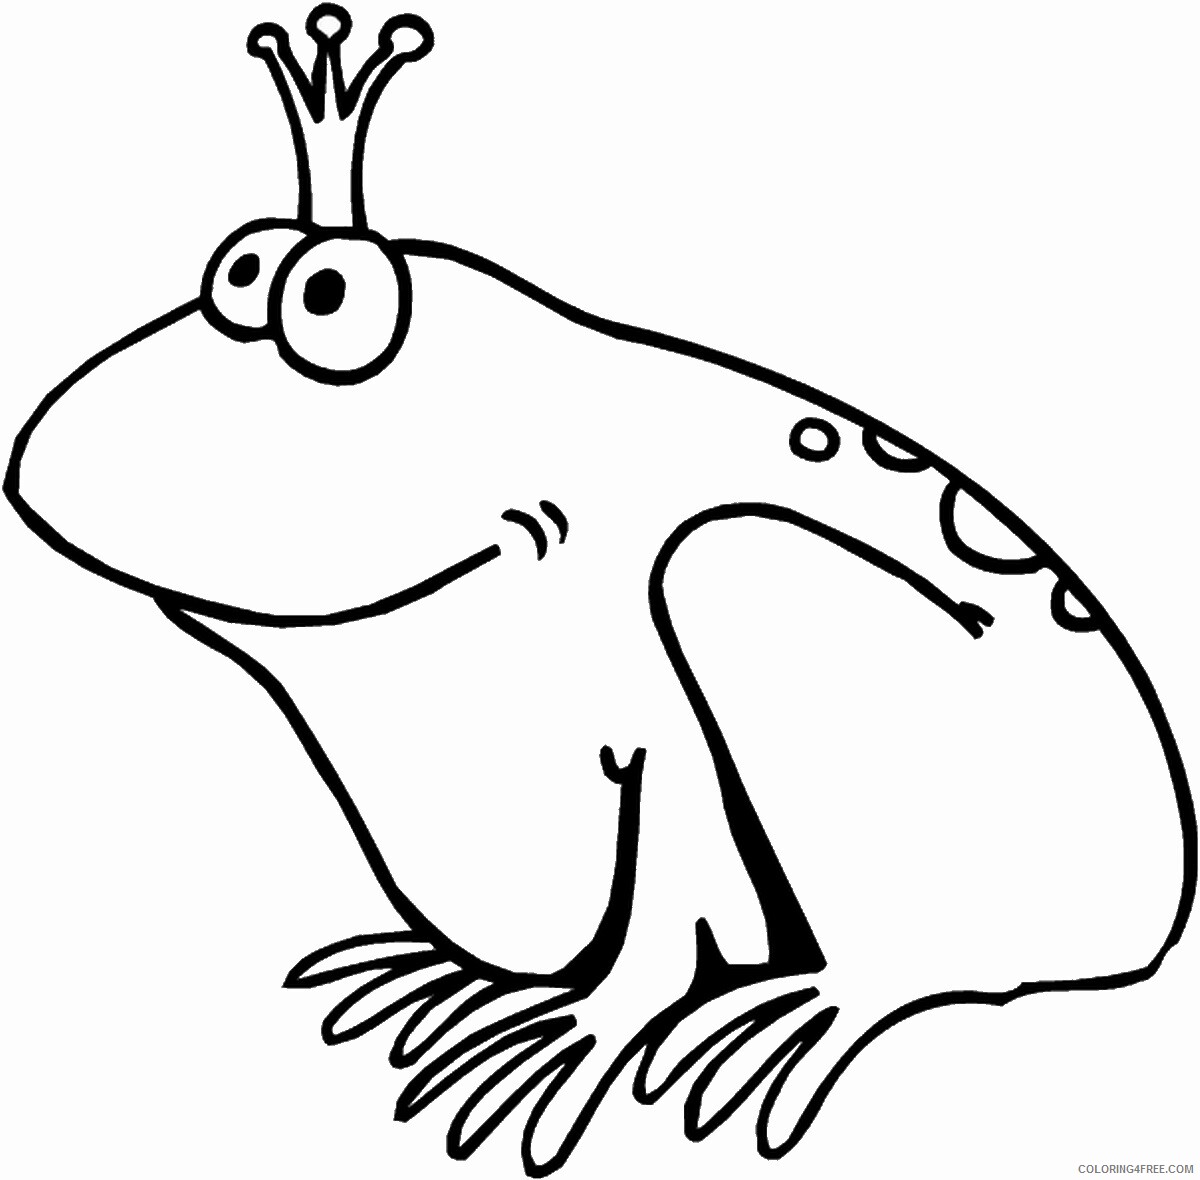 Frog Coloring Pages Animal Printable Sheets frogsc1 2021 2322 Coloring4free